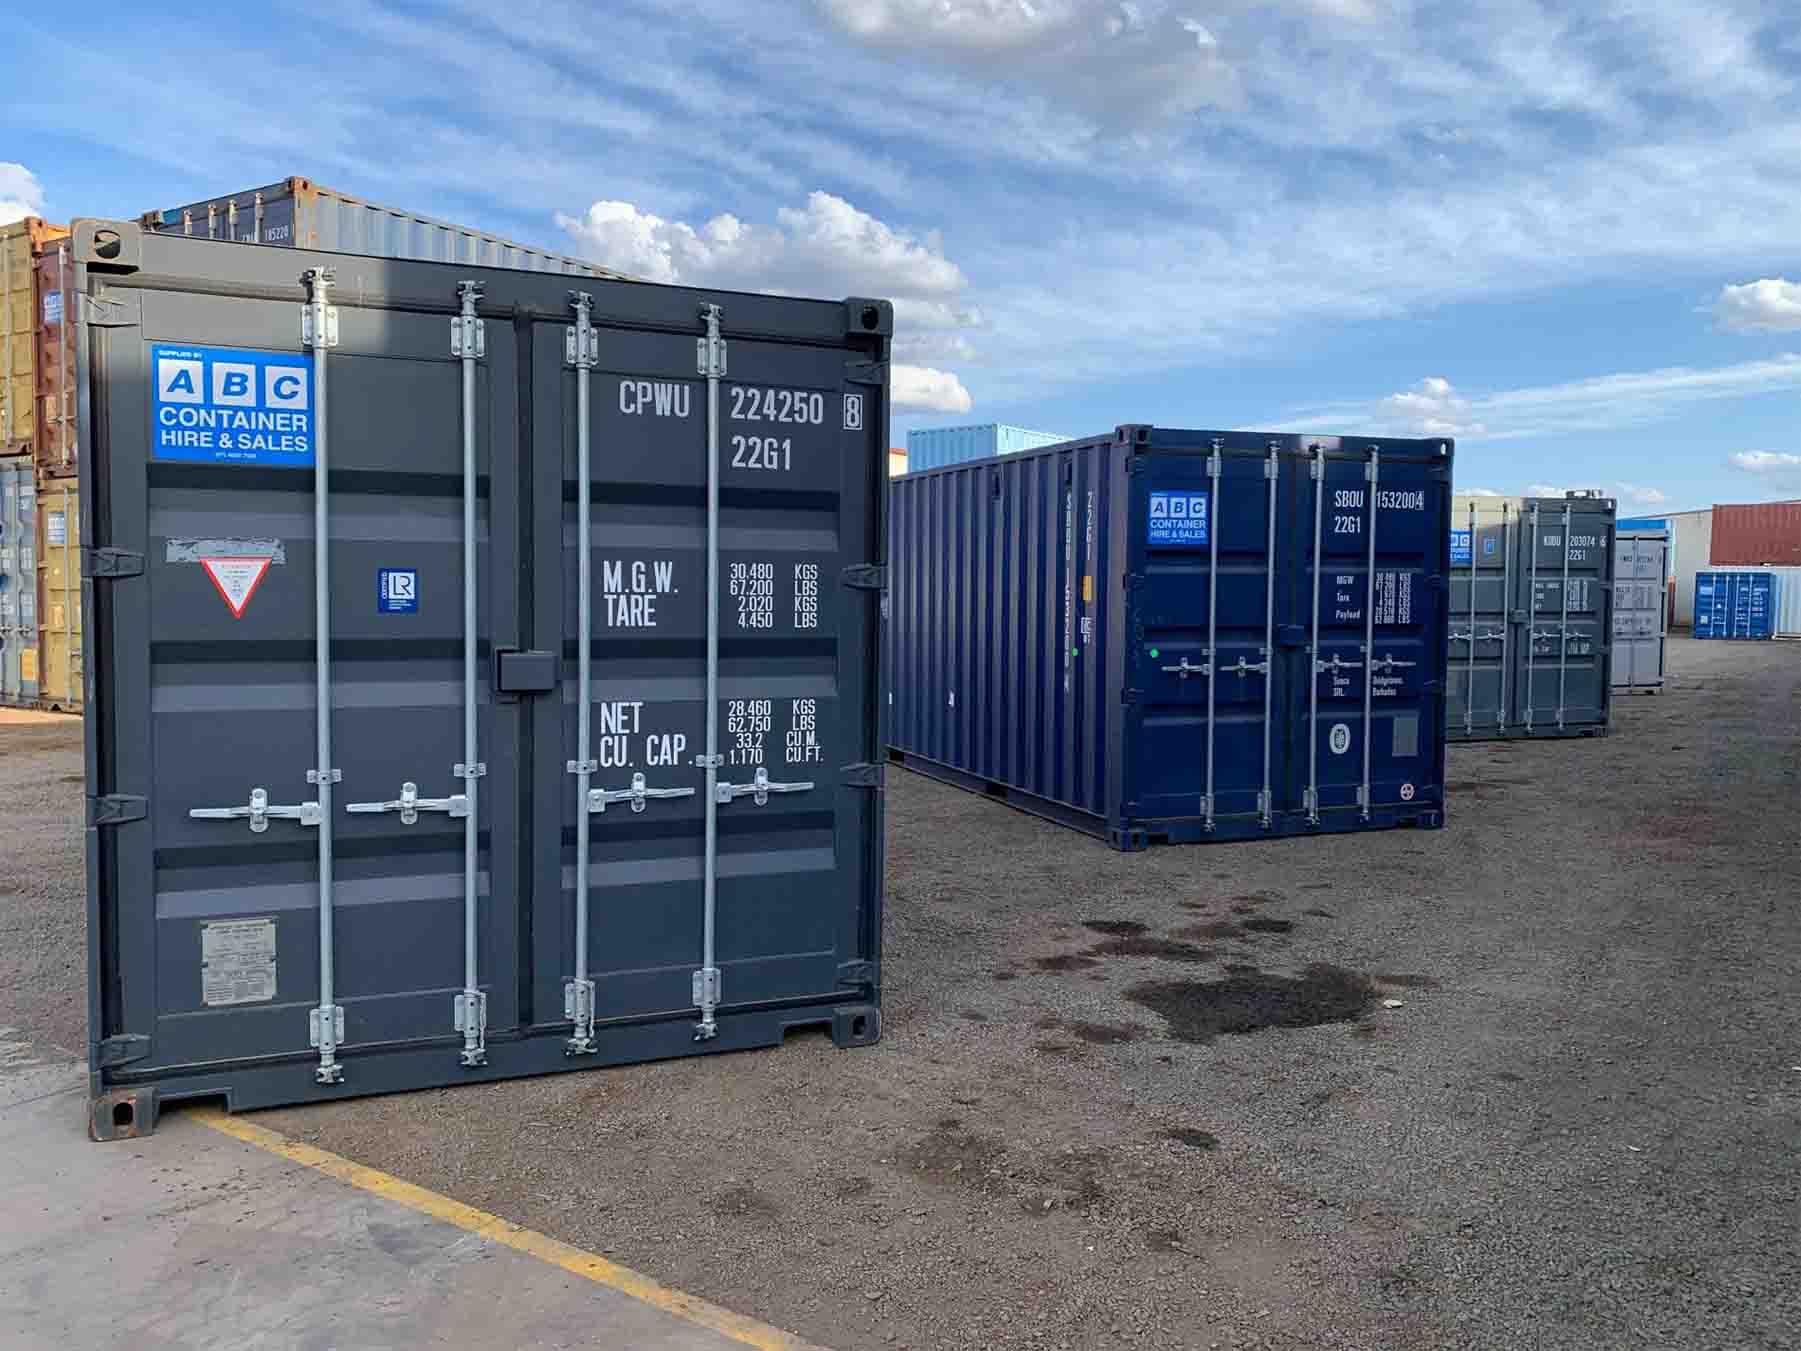 A group of 20ft shipping containers